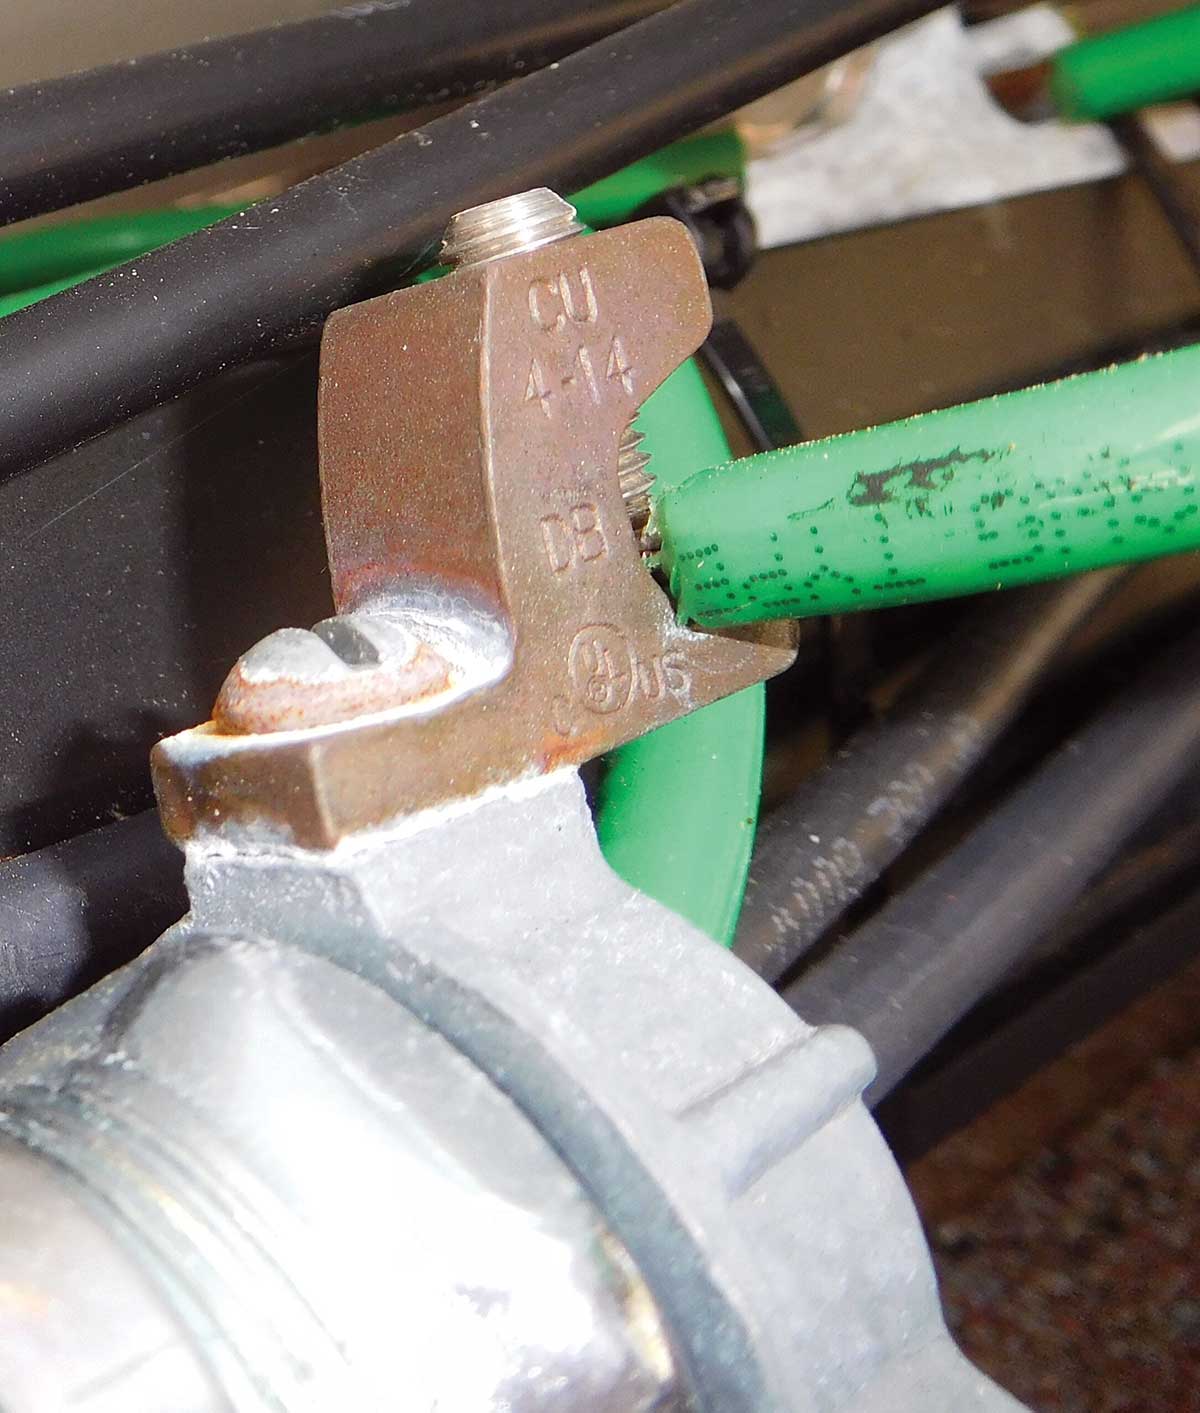 Photo 2 (left). Replacing the lug on a bonding bushing may seem like a simple solution in an outdoor environment, but in addition to violating the product listing, the attempted solution didn’t completely solve the problem. Photo courtesy of Chris Houtz.